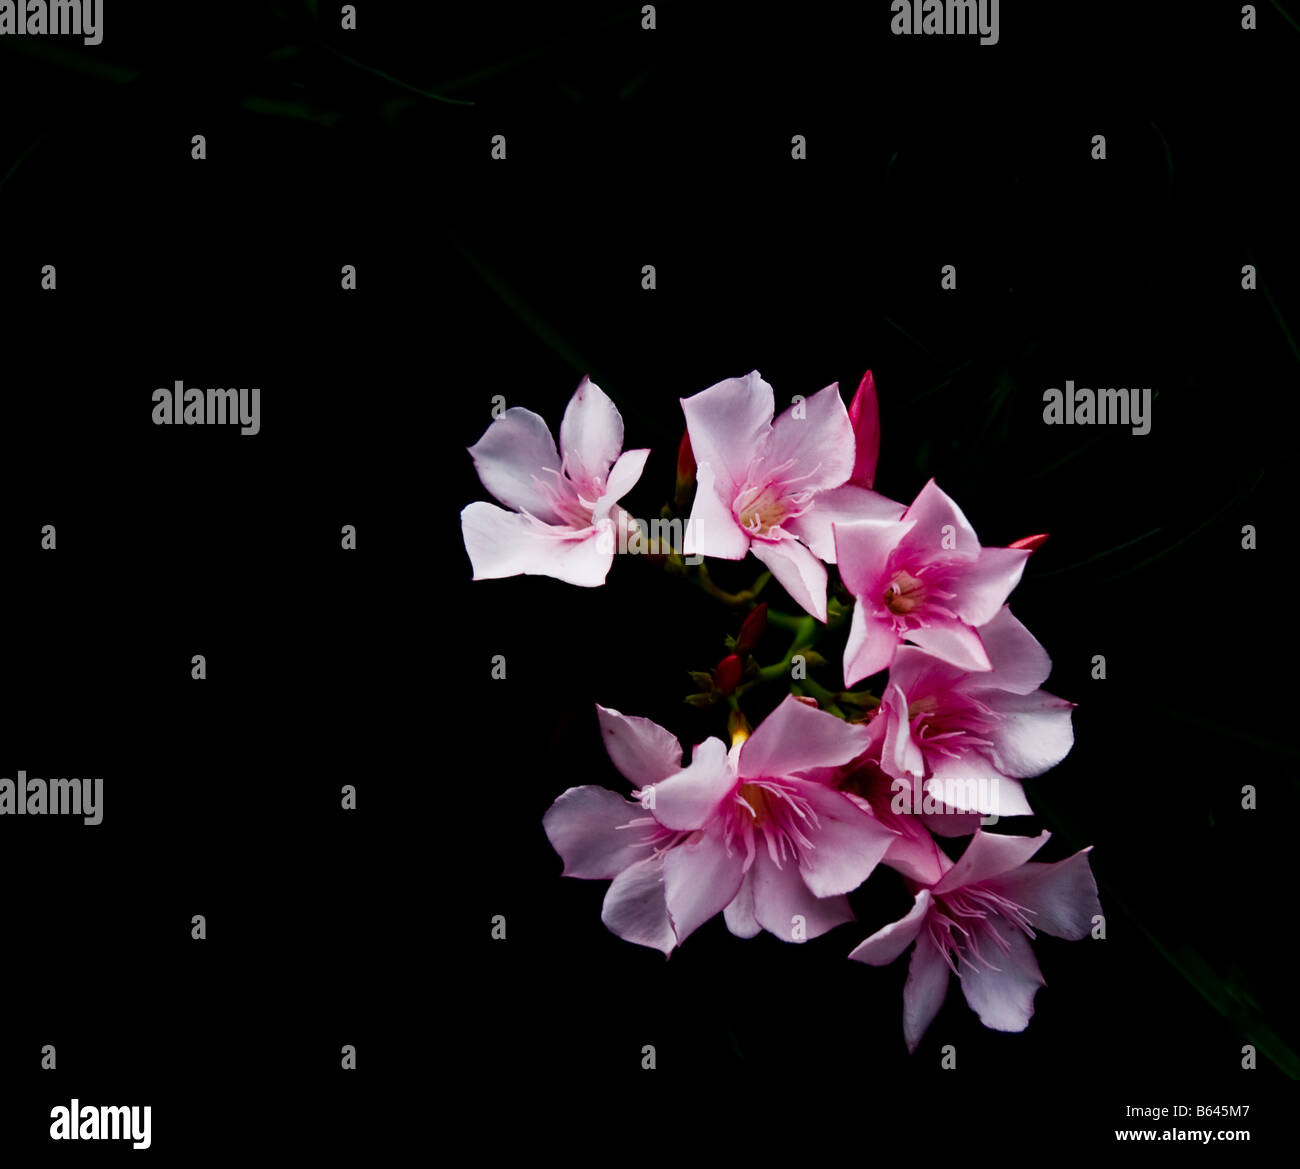 Inflorescence of pink oleander against black background with copyspace on left Stock Photo